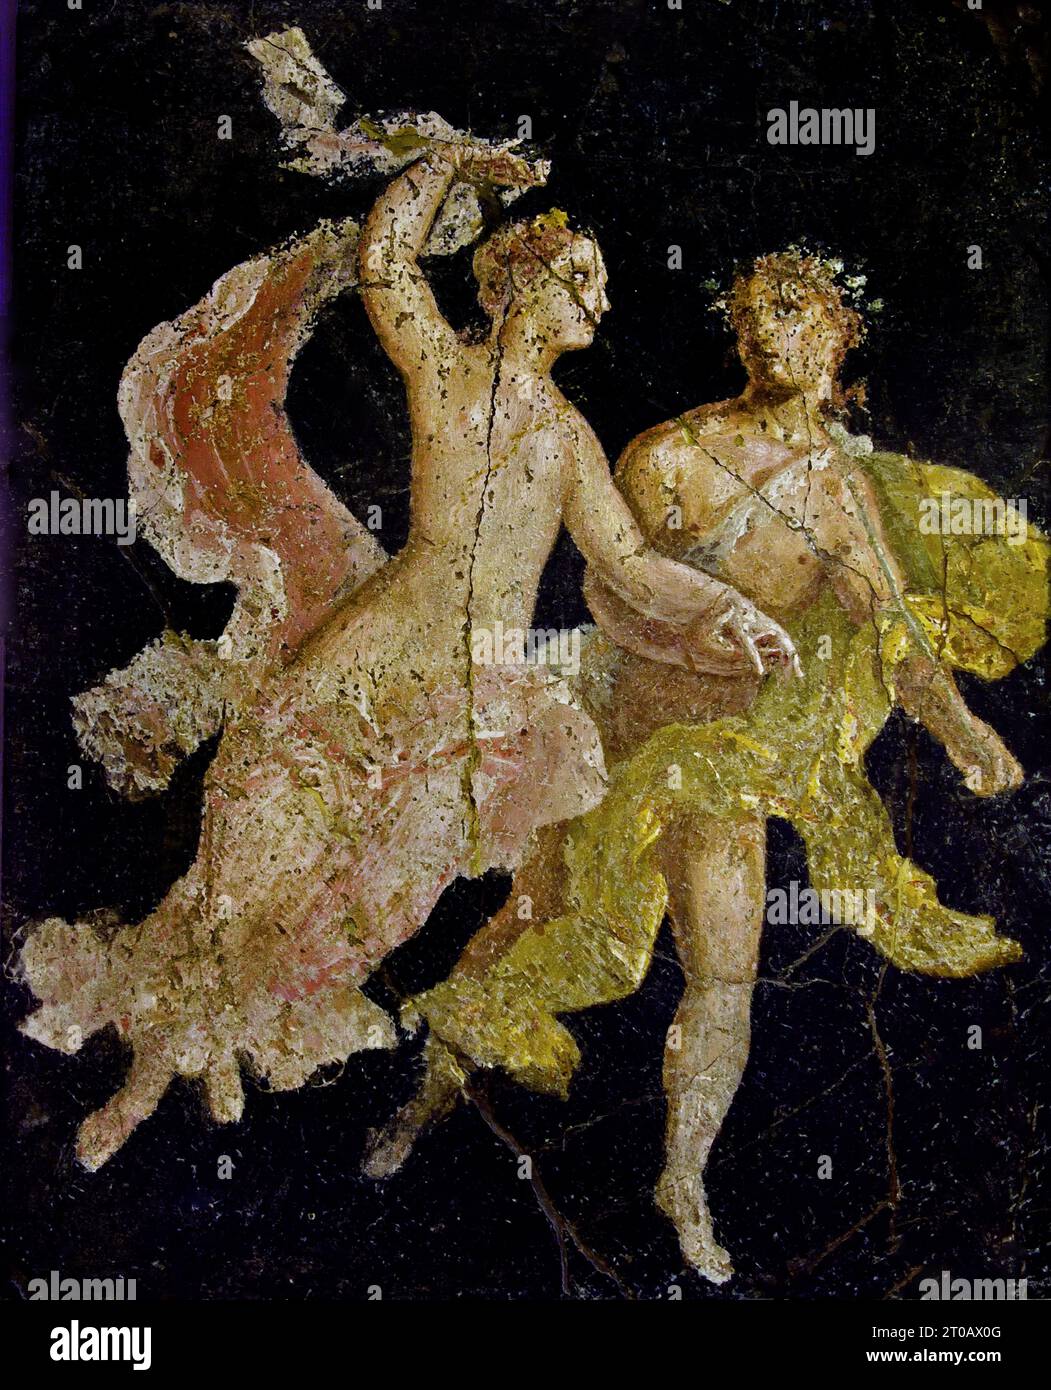 Couple in flight, 10-37 AD,  Ariadne and Dionysus, God appears to accompany, Ariadne in her chariot where she remained, shining with the luminous crown, that she had received from, Dionysus as a wedding gift Fresco Pompeii Roman City is located near Naples in the Campania region of Italy. Pompeii was buried under 4-6 m of volcanic ash and pumice in the eruption of Mount Vesuvius in AD 79. Italy Stock Photo